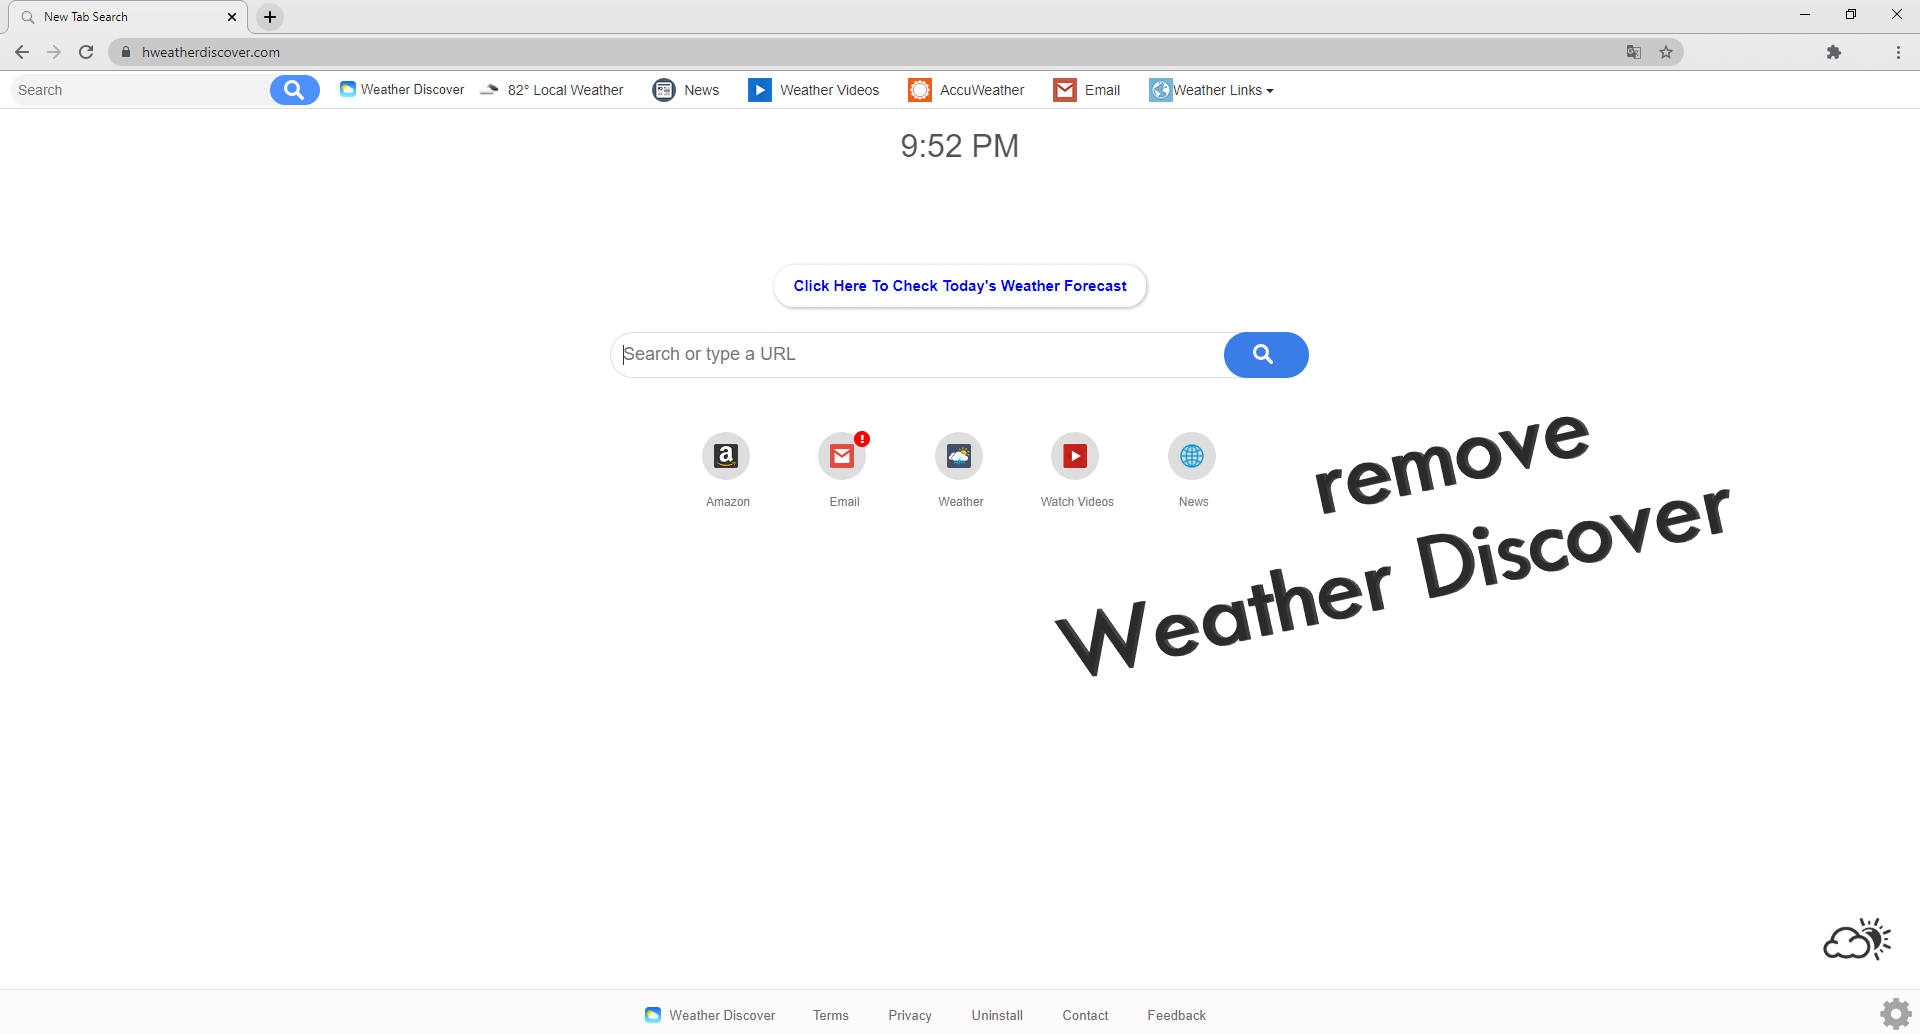 How to remove Weather Discover